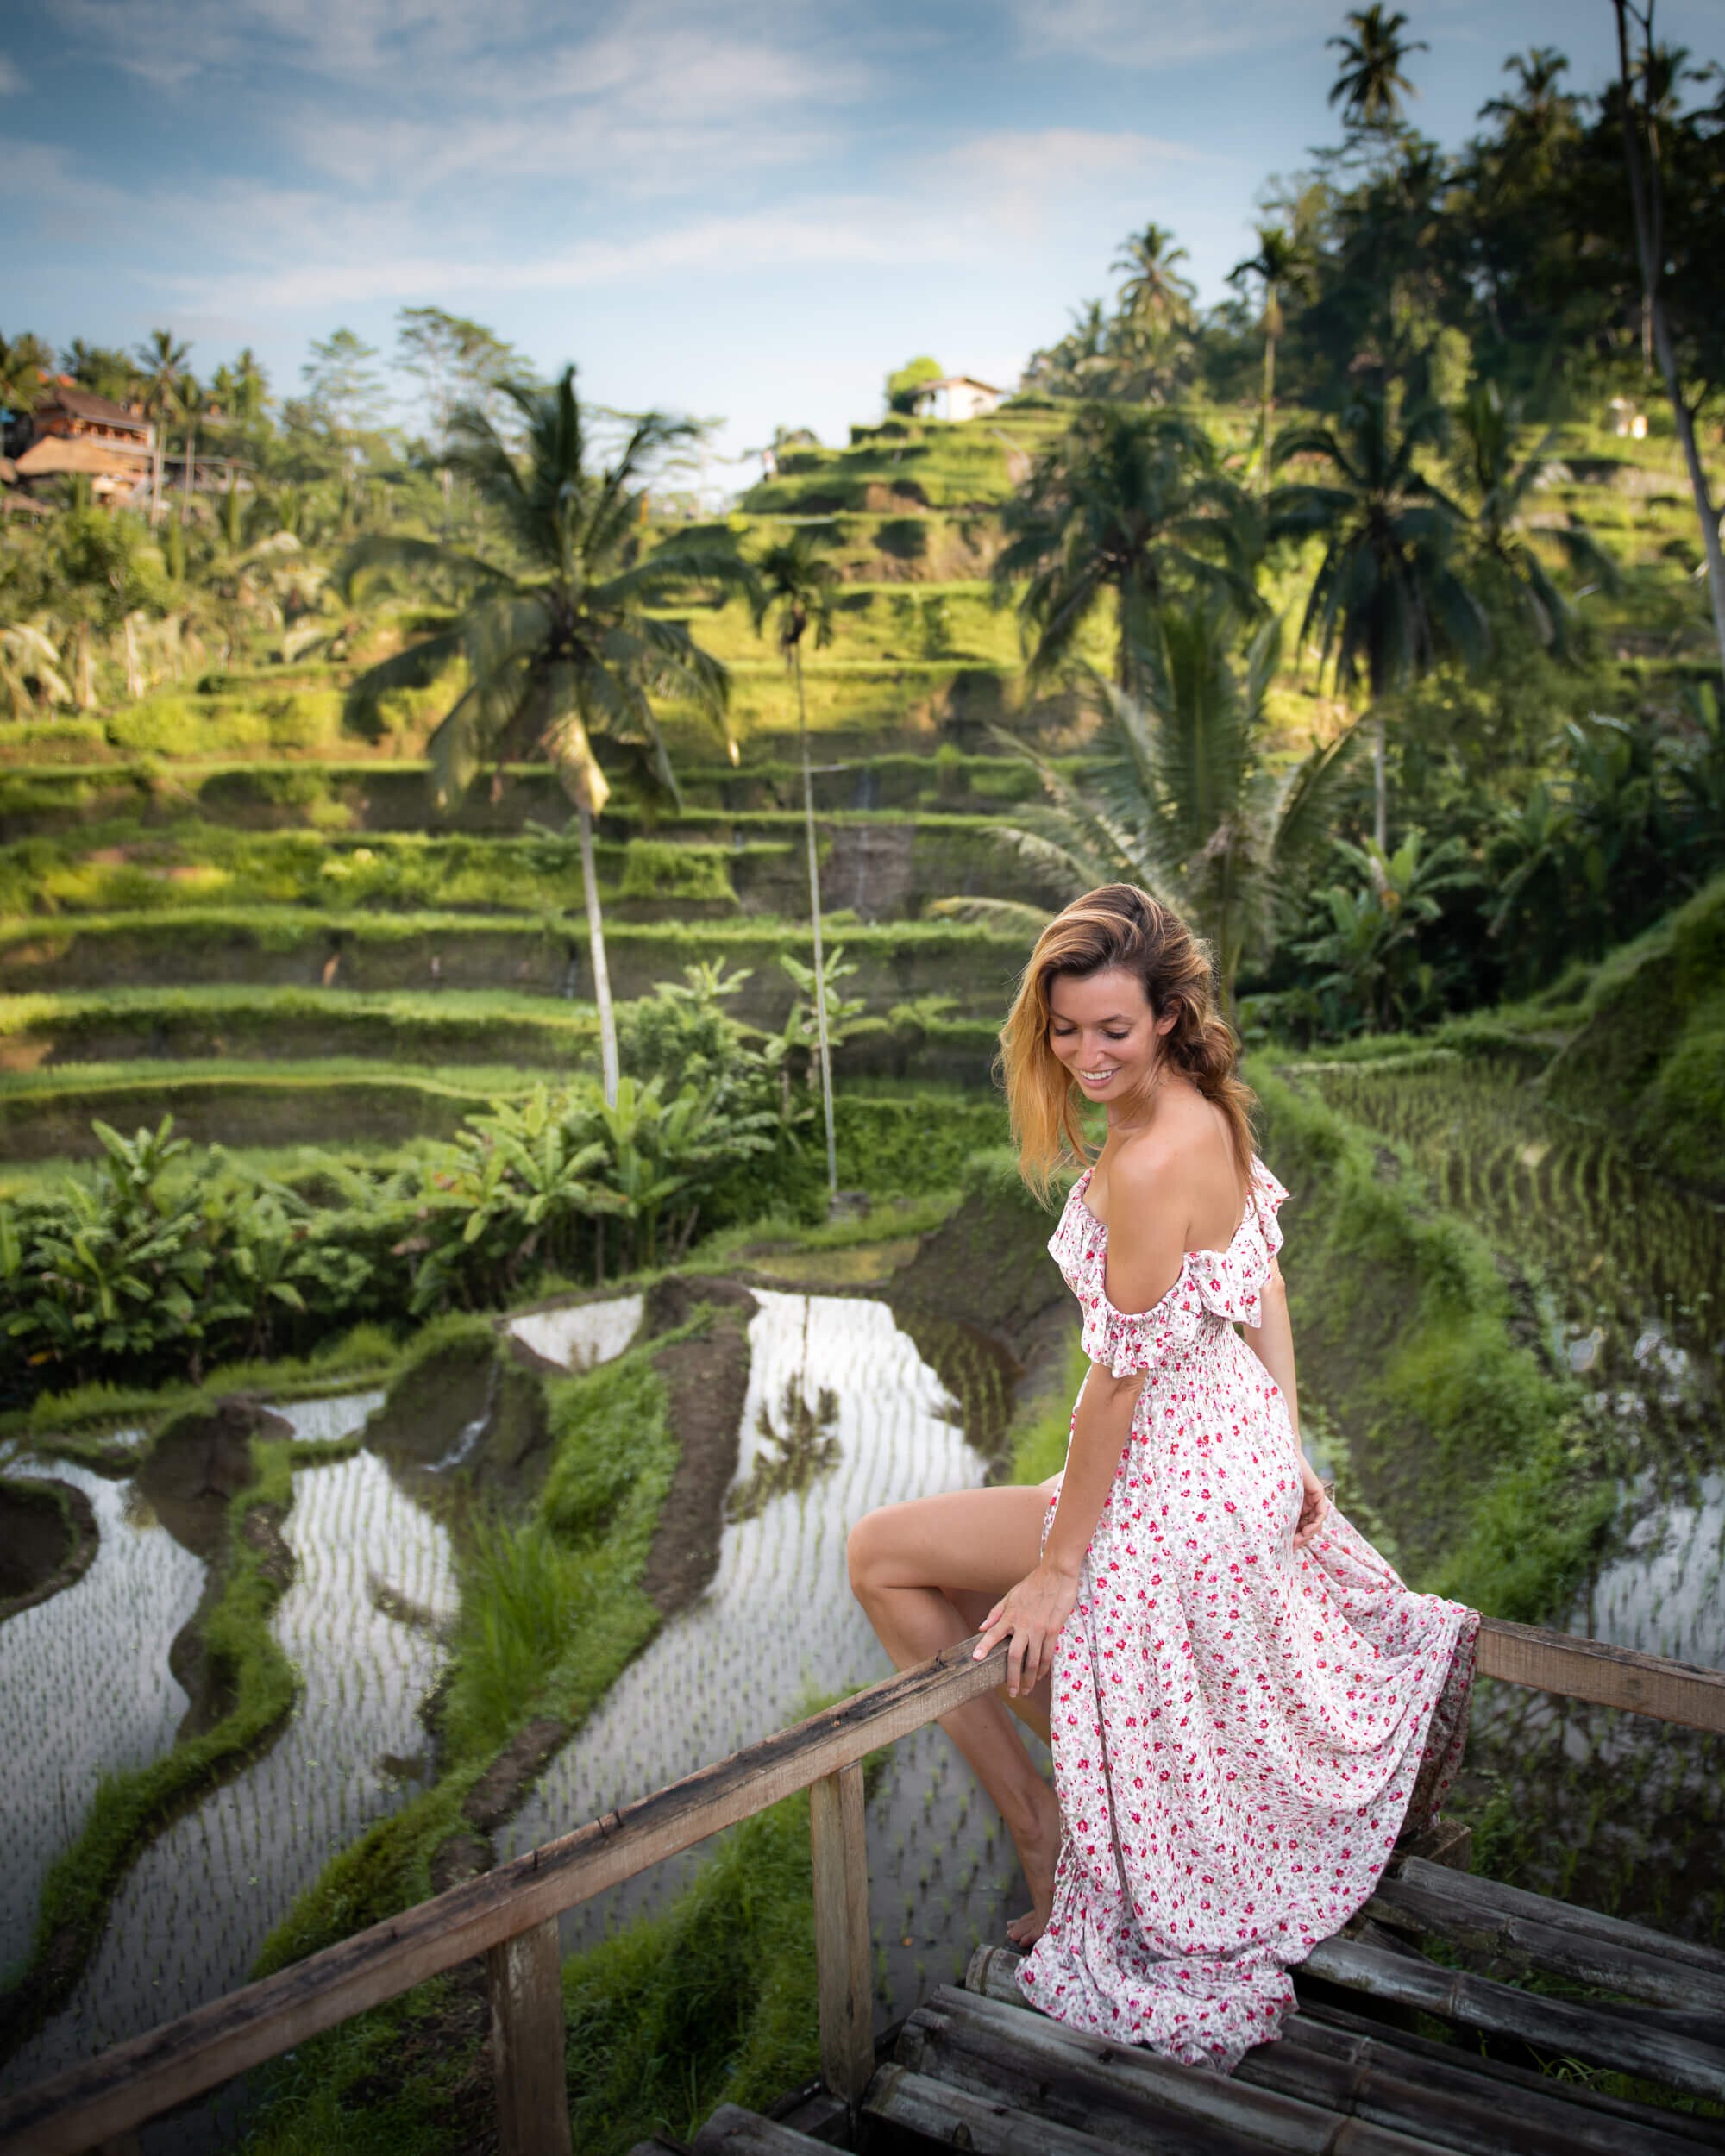 Exploring the rice terraces in Bali. Photo by:  Jess Bonde